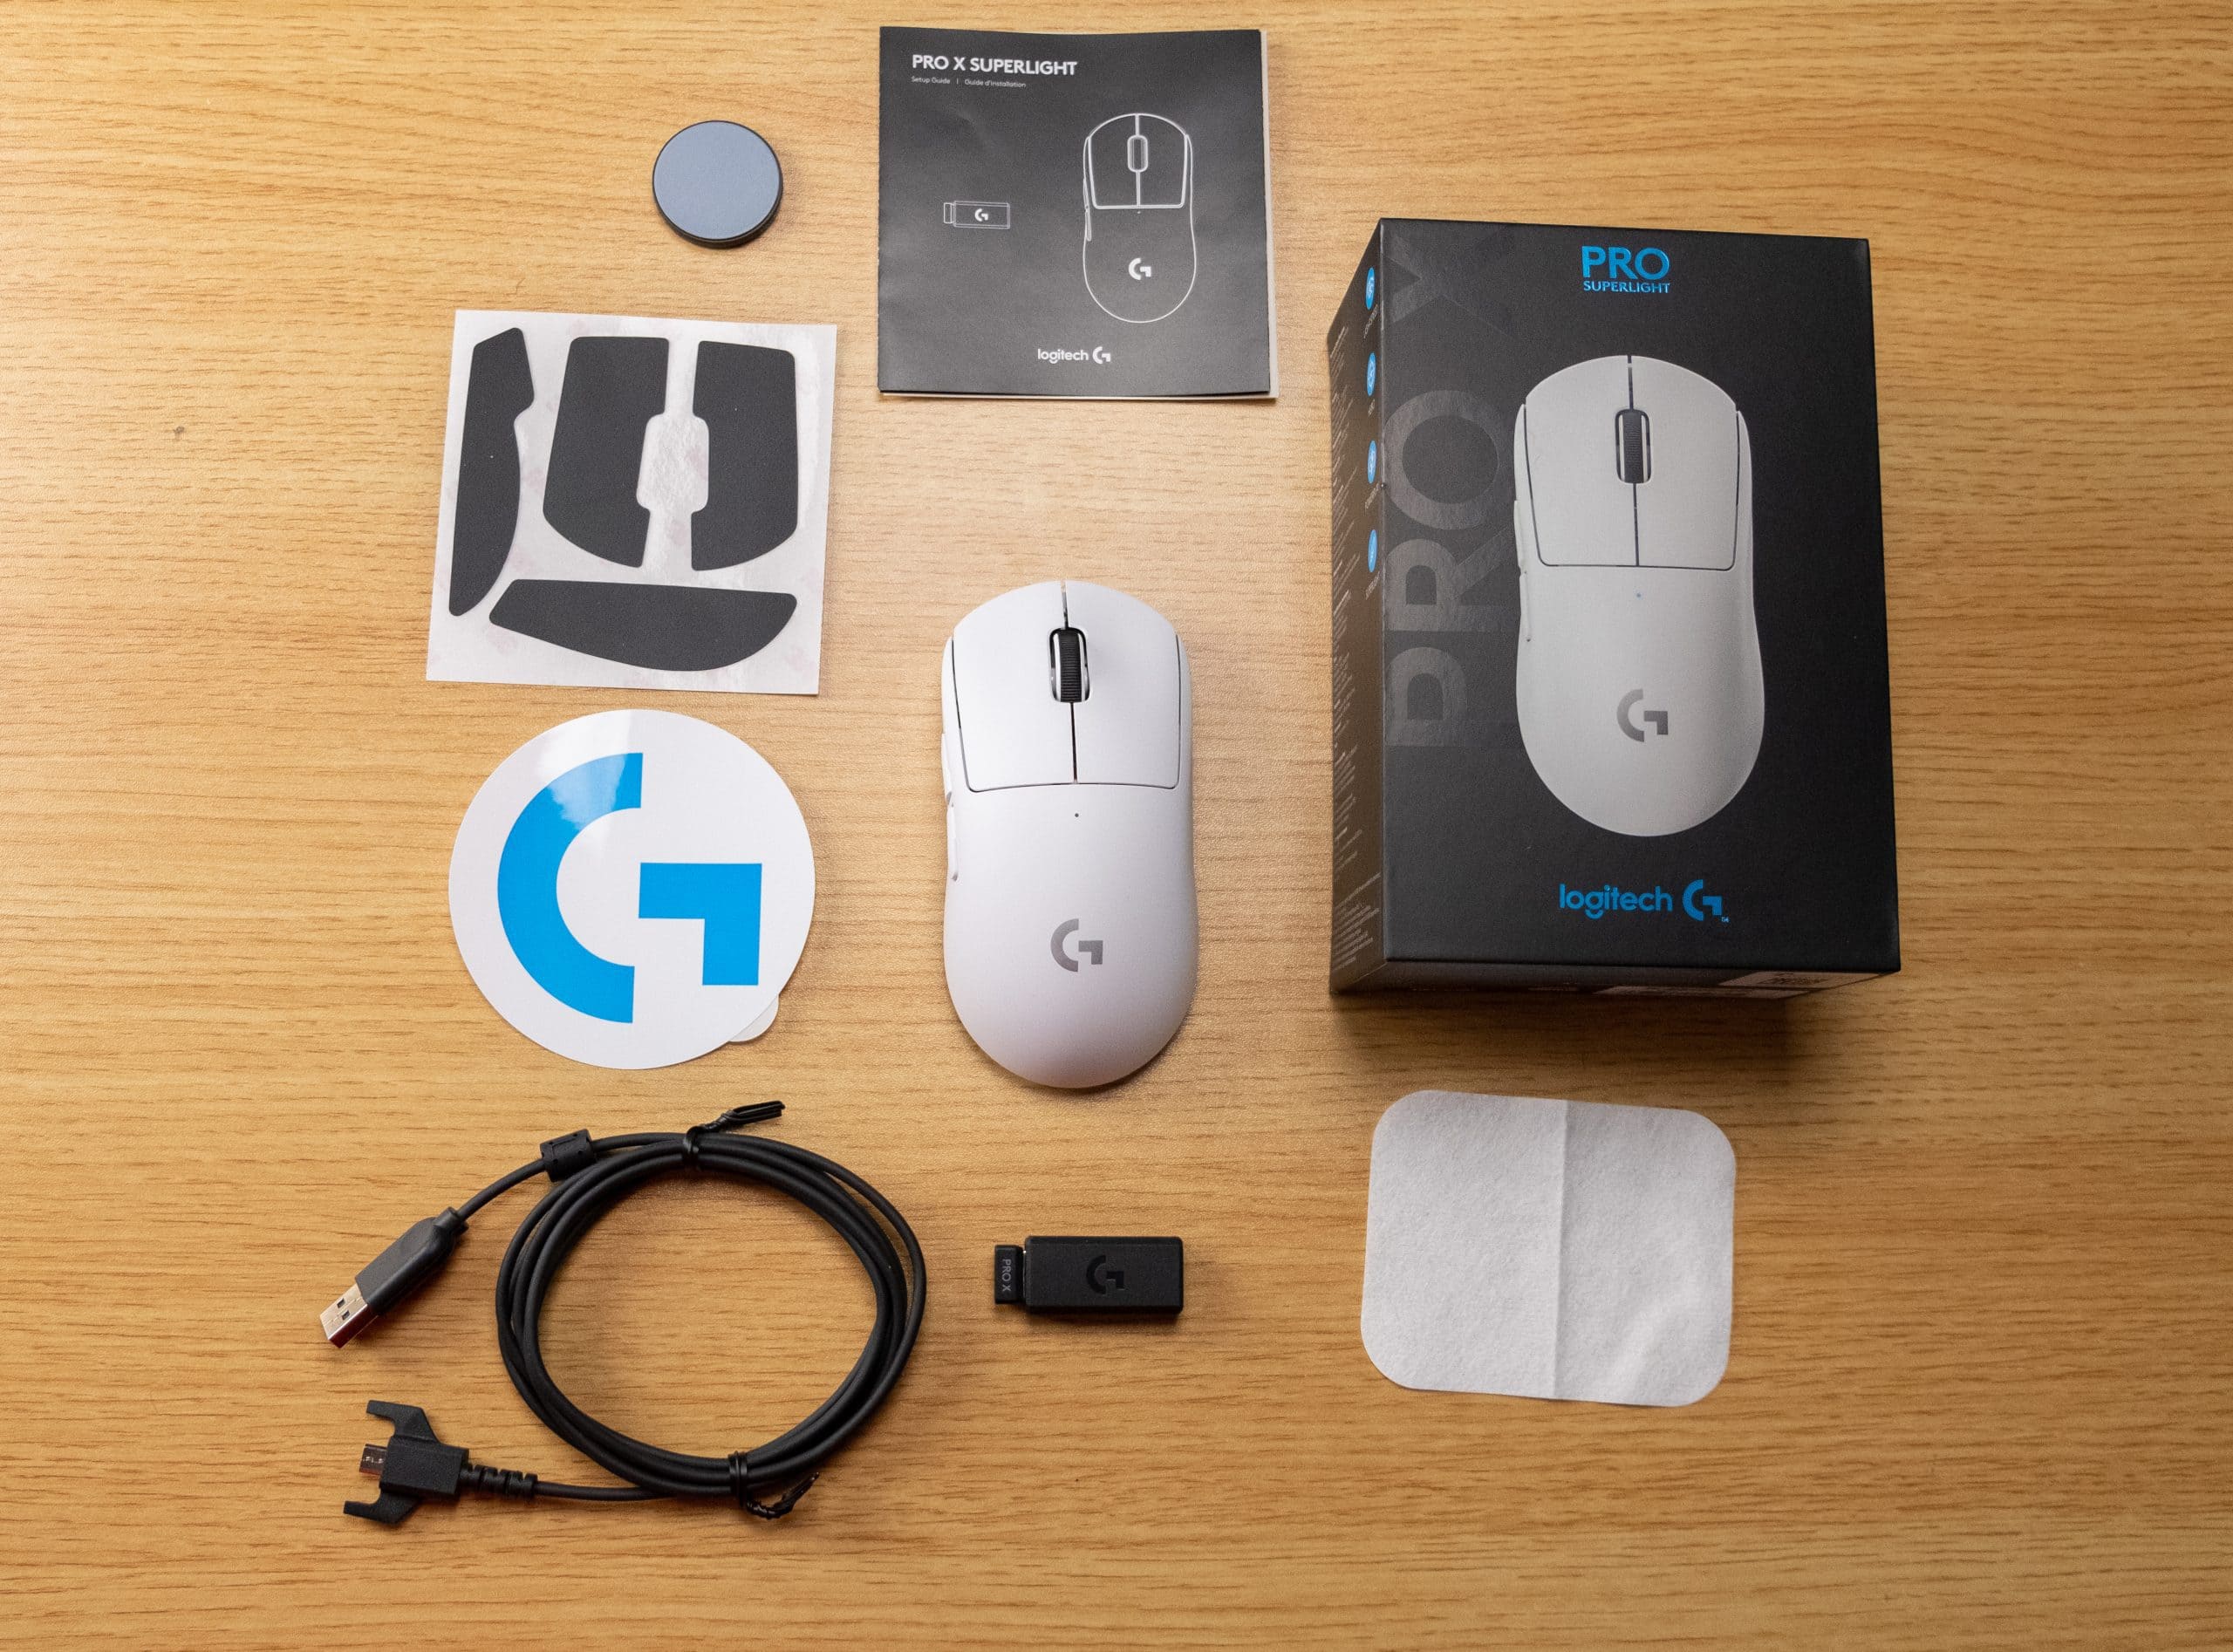 Logitech G Pro X Superlight Wireless Whats in the box scaled